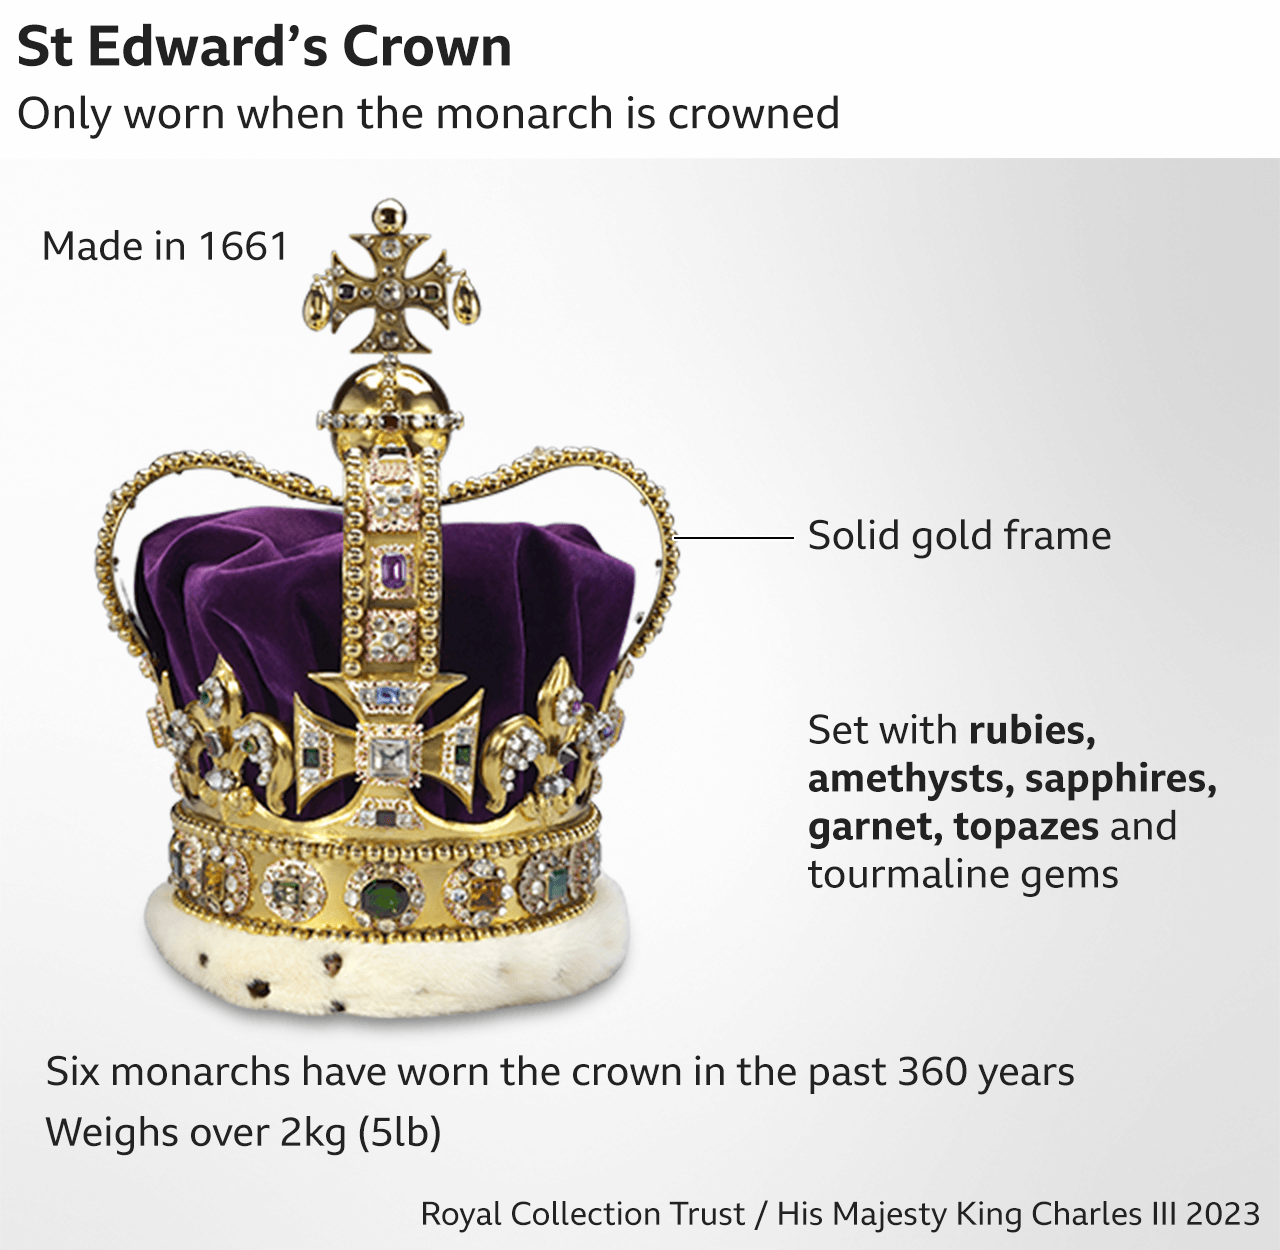 Graphic of St Edward's Crown which weighs over 2kg - it has a solid gold frame and is decorated with rubies, amethysts, sapphires, garnet and topazes